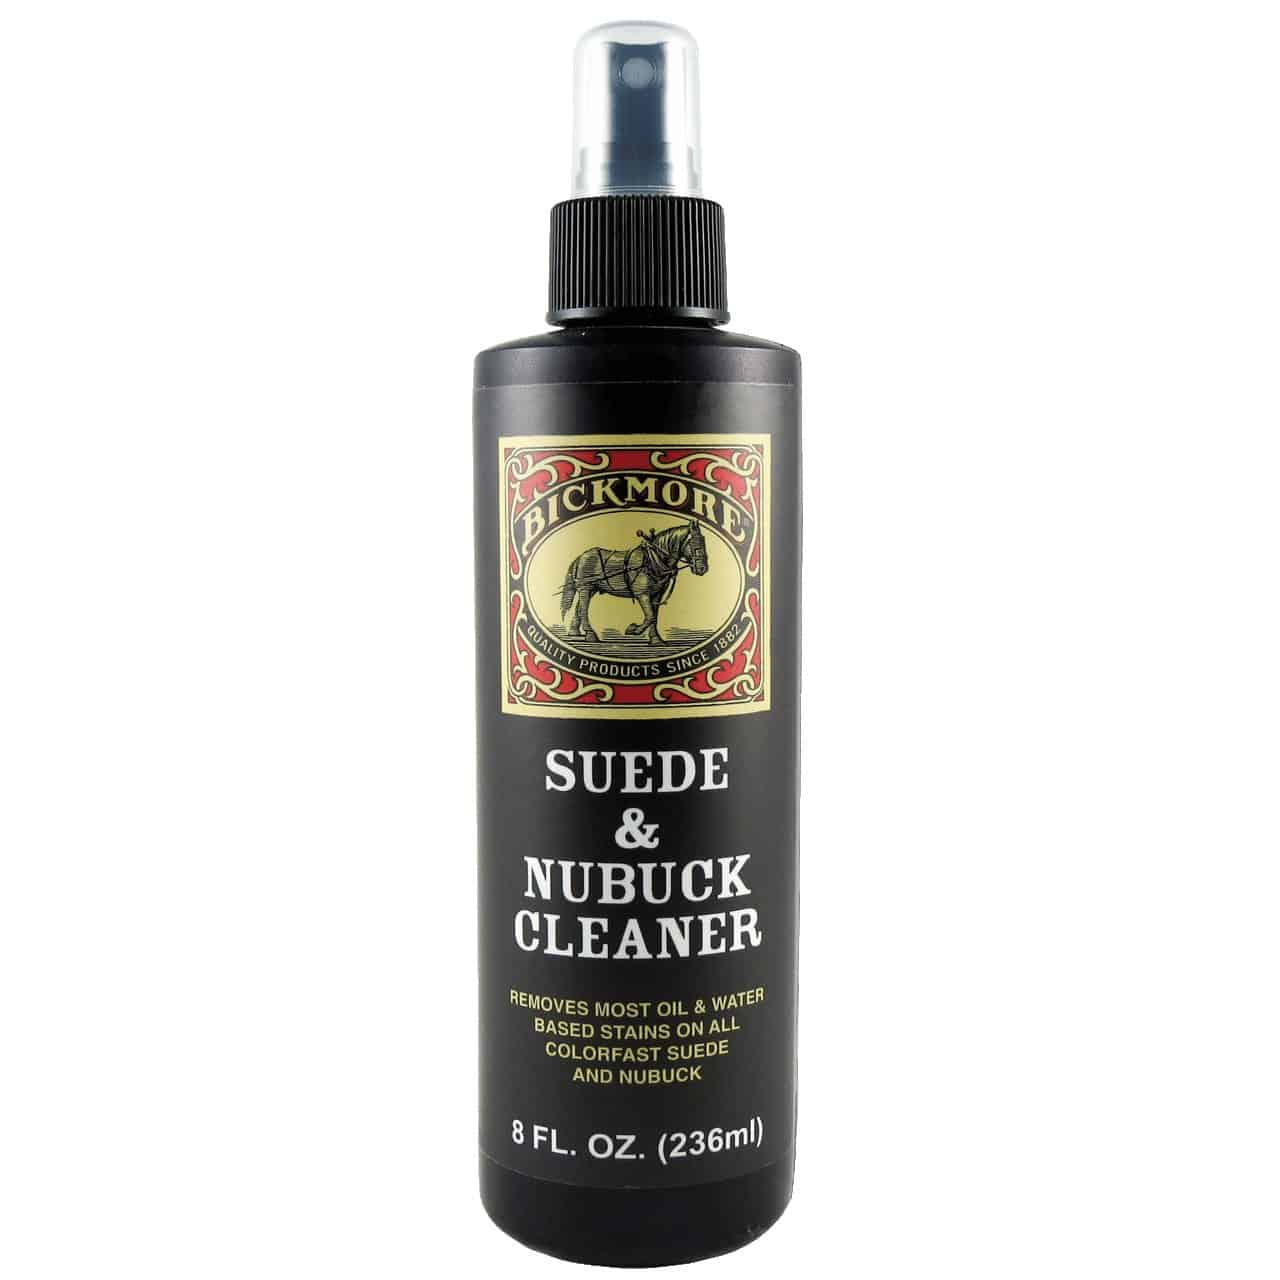 Bickmore Suede & Nubuck Cleaner (8 oz / 236ml) - 9 for 9